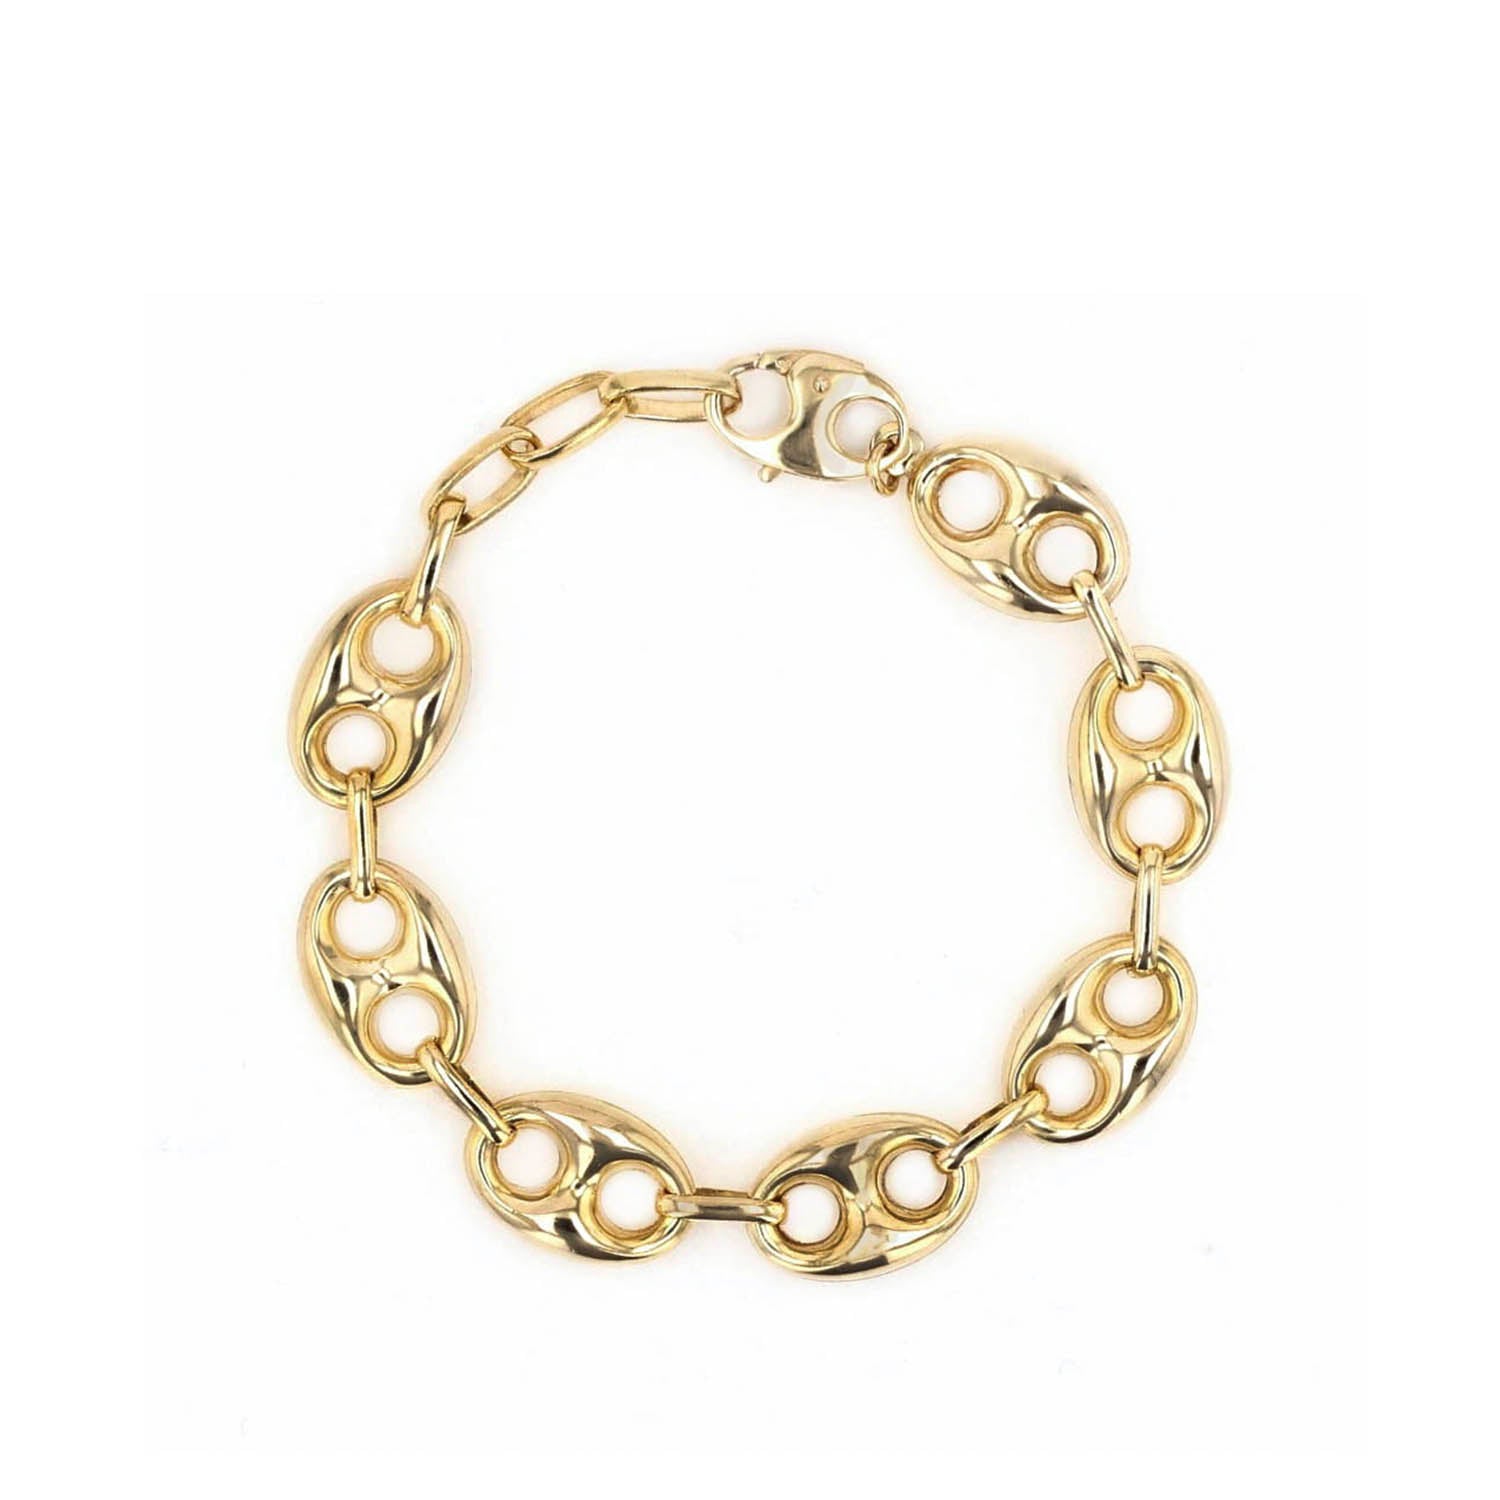 Amazon.com: Bling Jewelry Fashion Statement Chunky Texture Large Oval  Interlocking Link Chain Matt Gold Plated Bracelet For Women Toggle Clasp  Closure: Clothing, Shoes & Jewelry